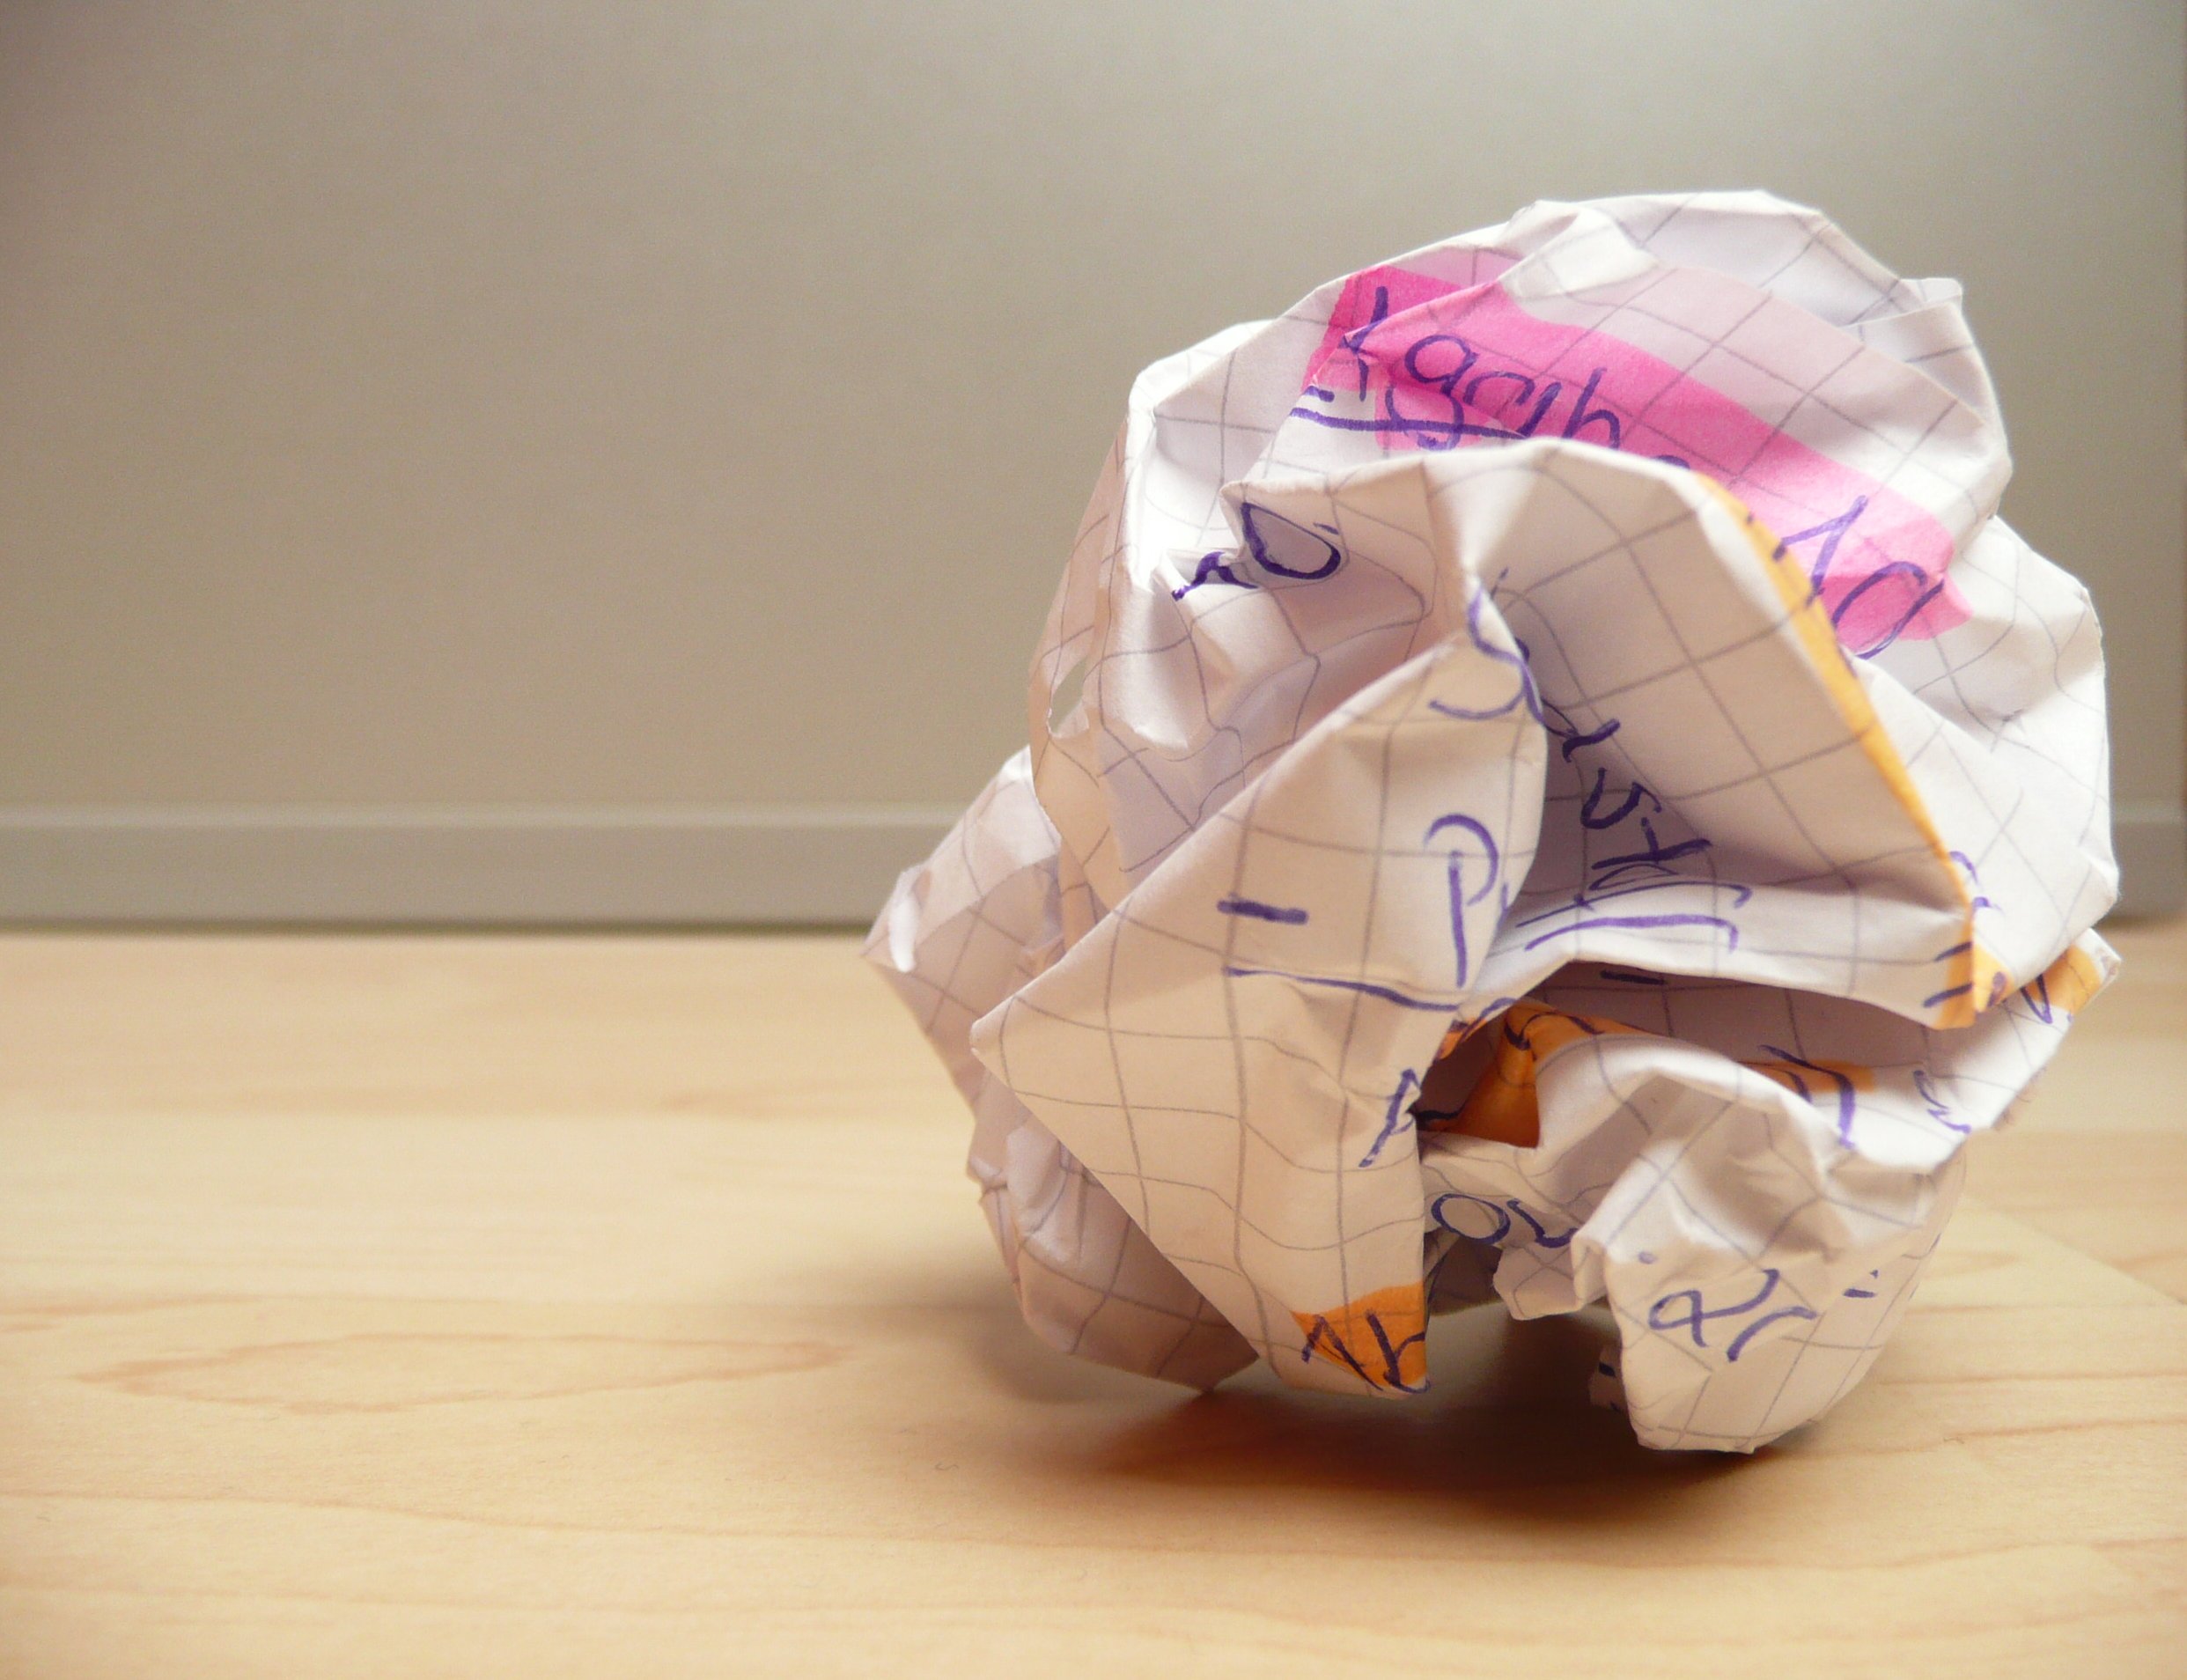 scrunched up ball of paper